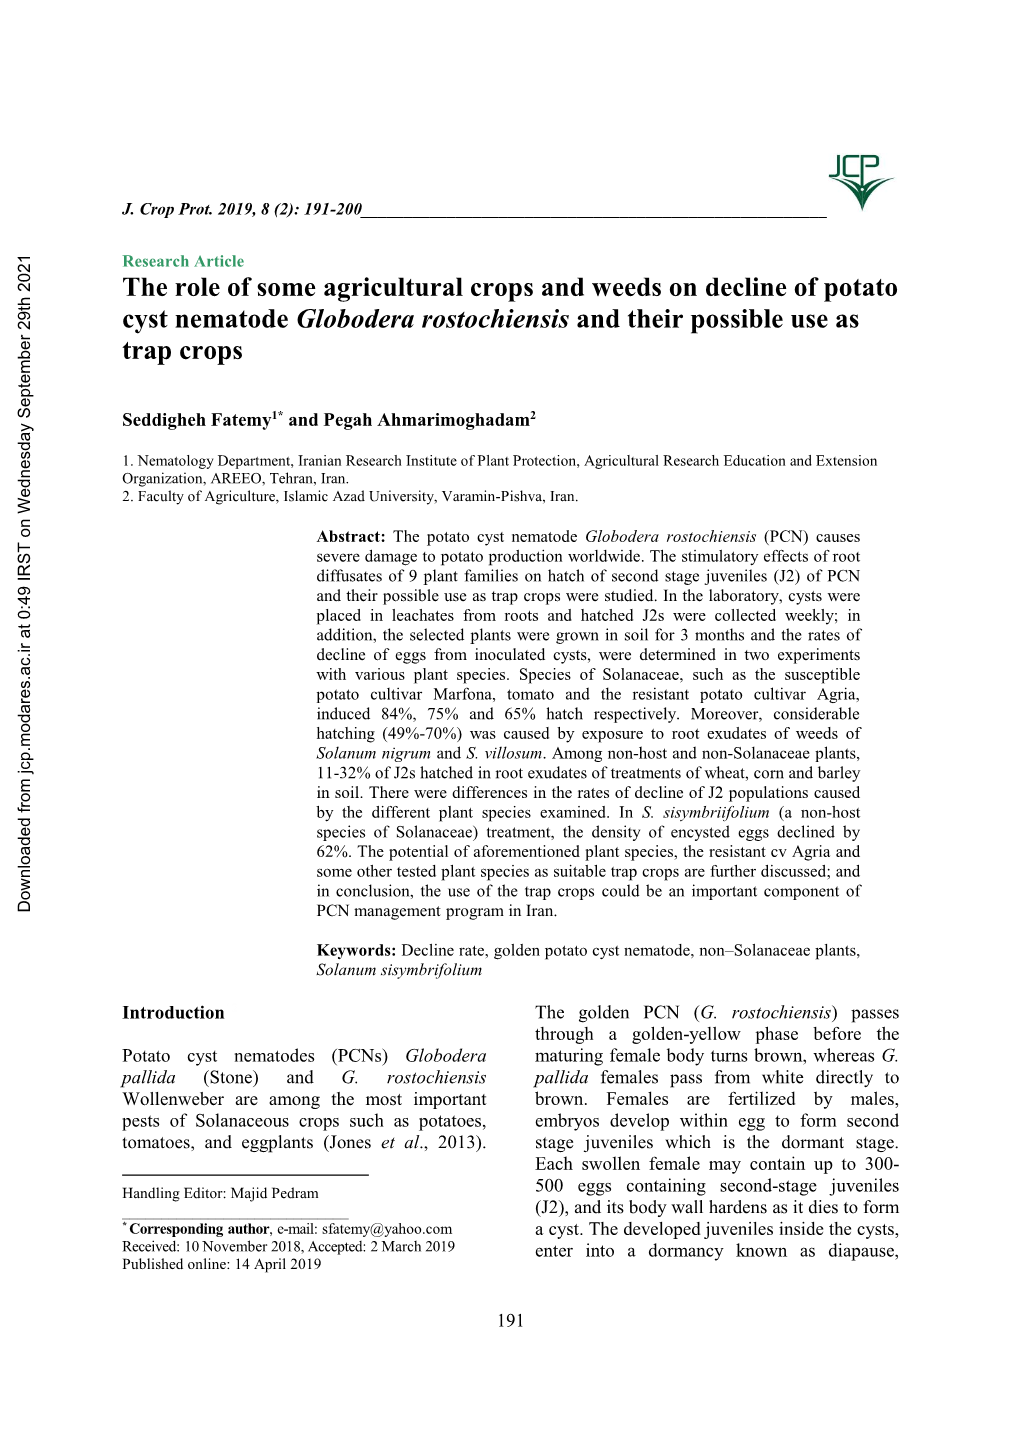 The Role of Some Agricultural Crops and Weeds on Decline of Potato Cyst Nematode Globodera Rostochiensis and Their Possible Use As Trap Crops